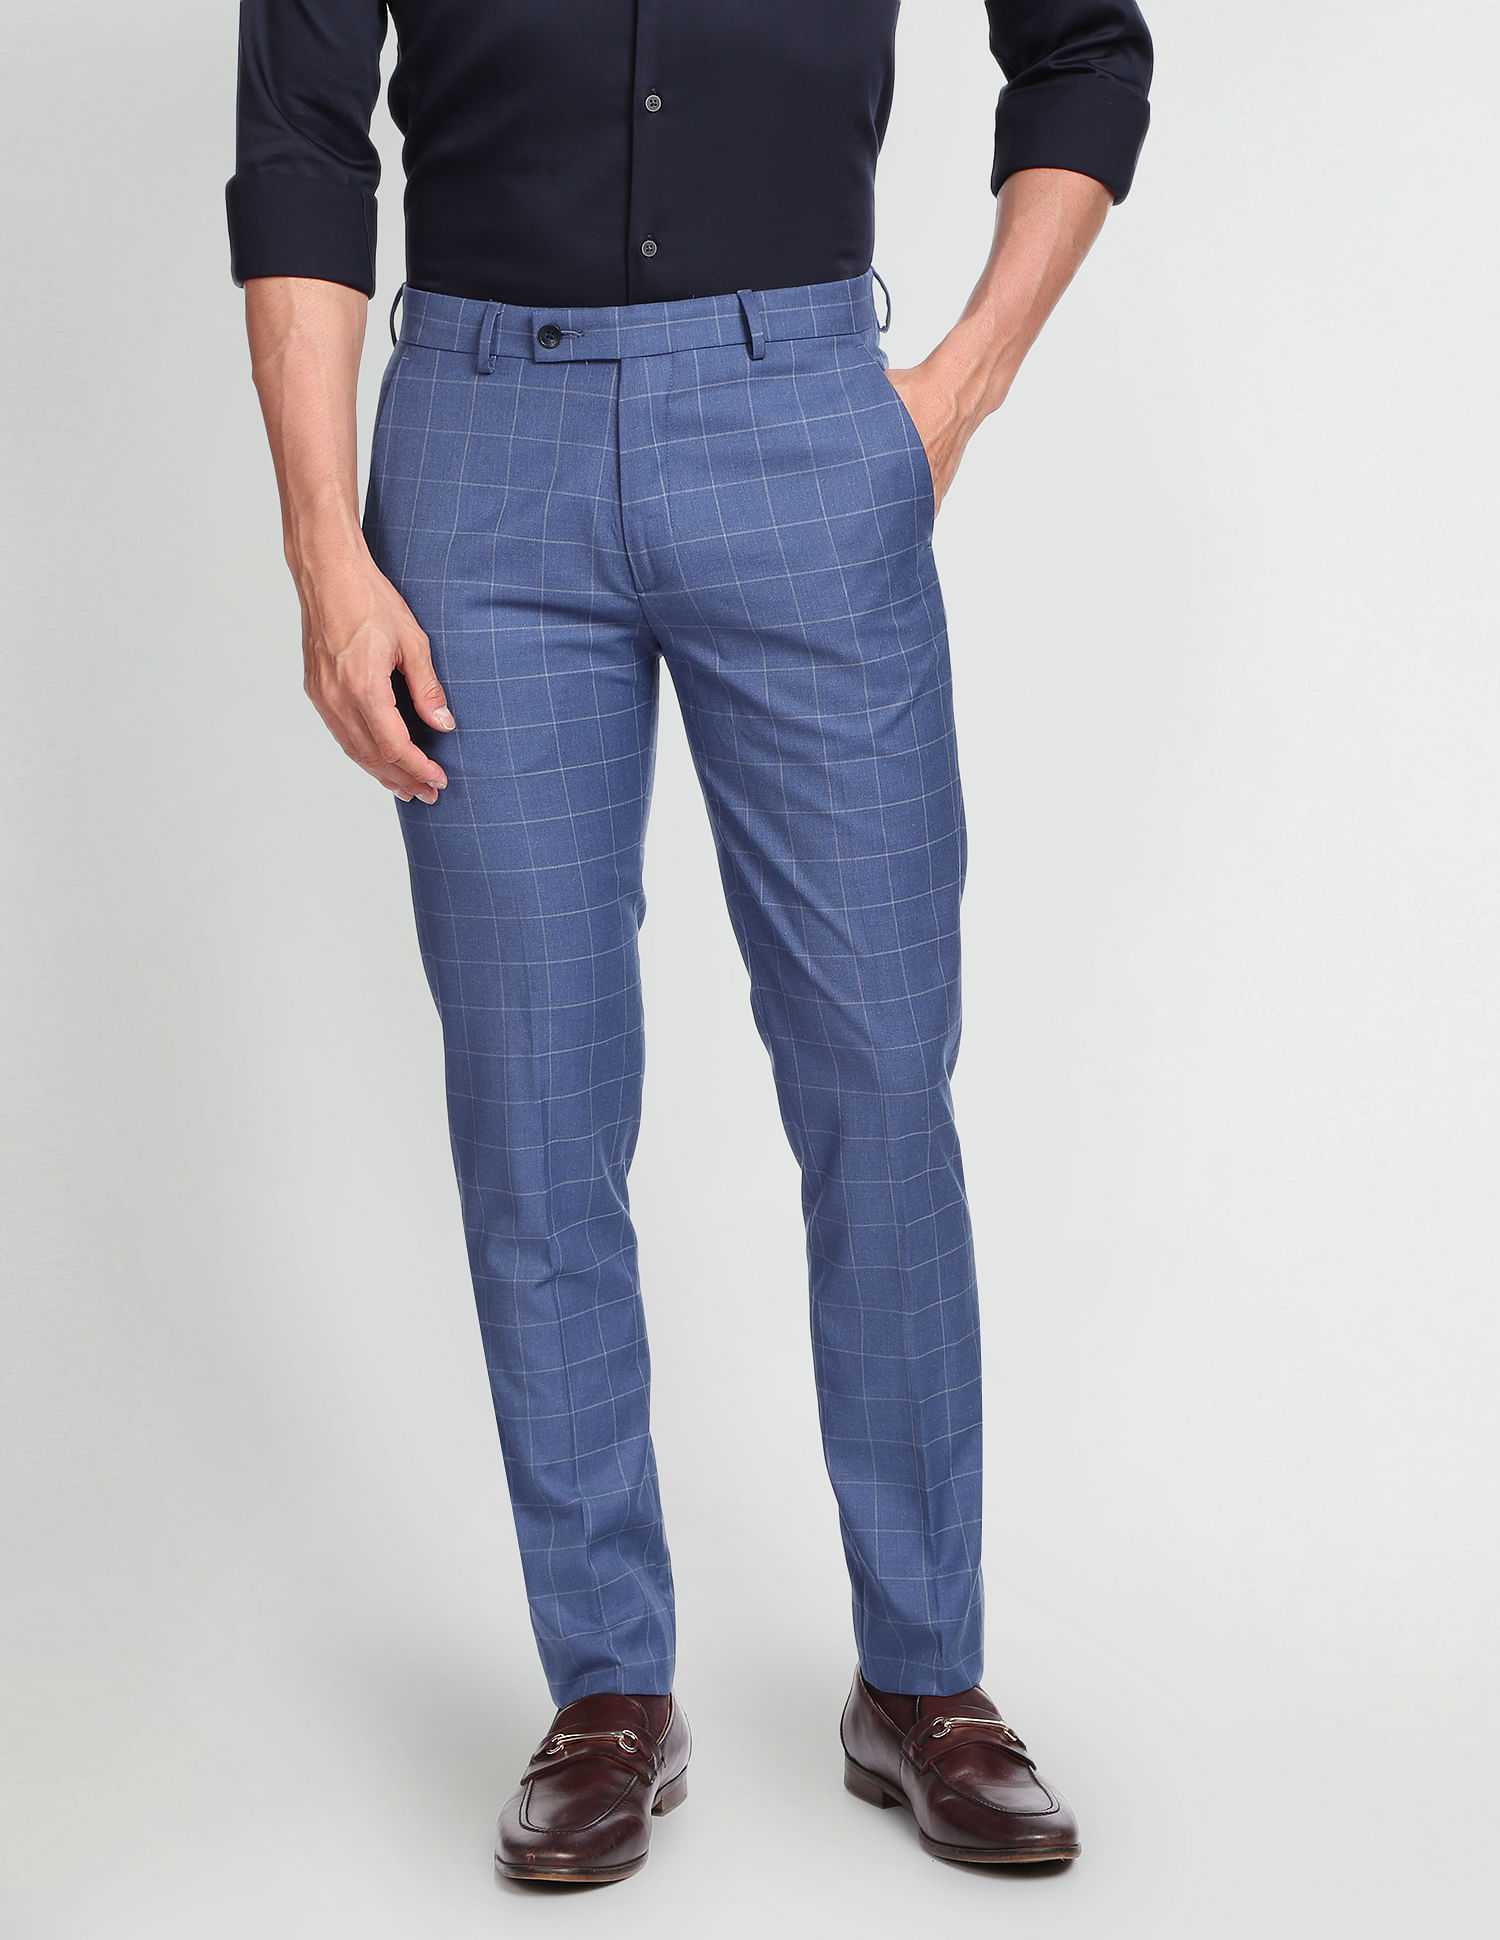 River Island Smart Trousers In Grey Check for Men